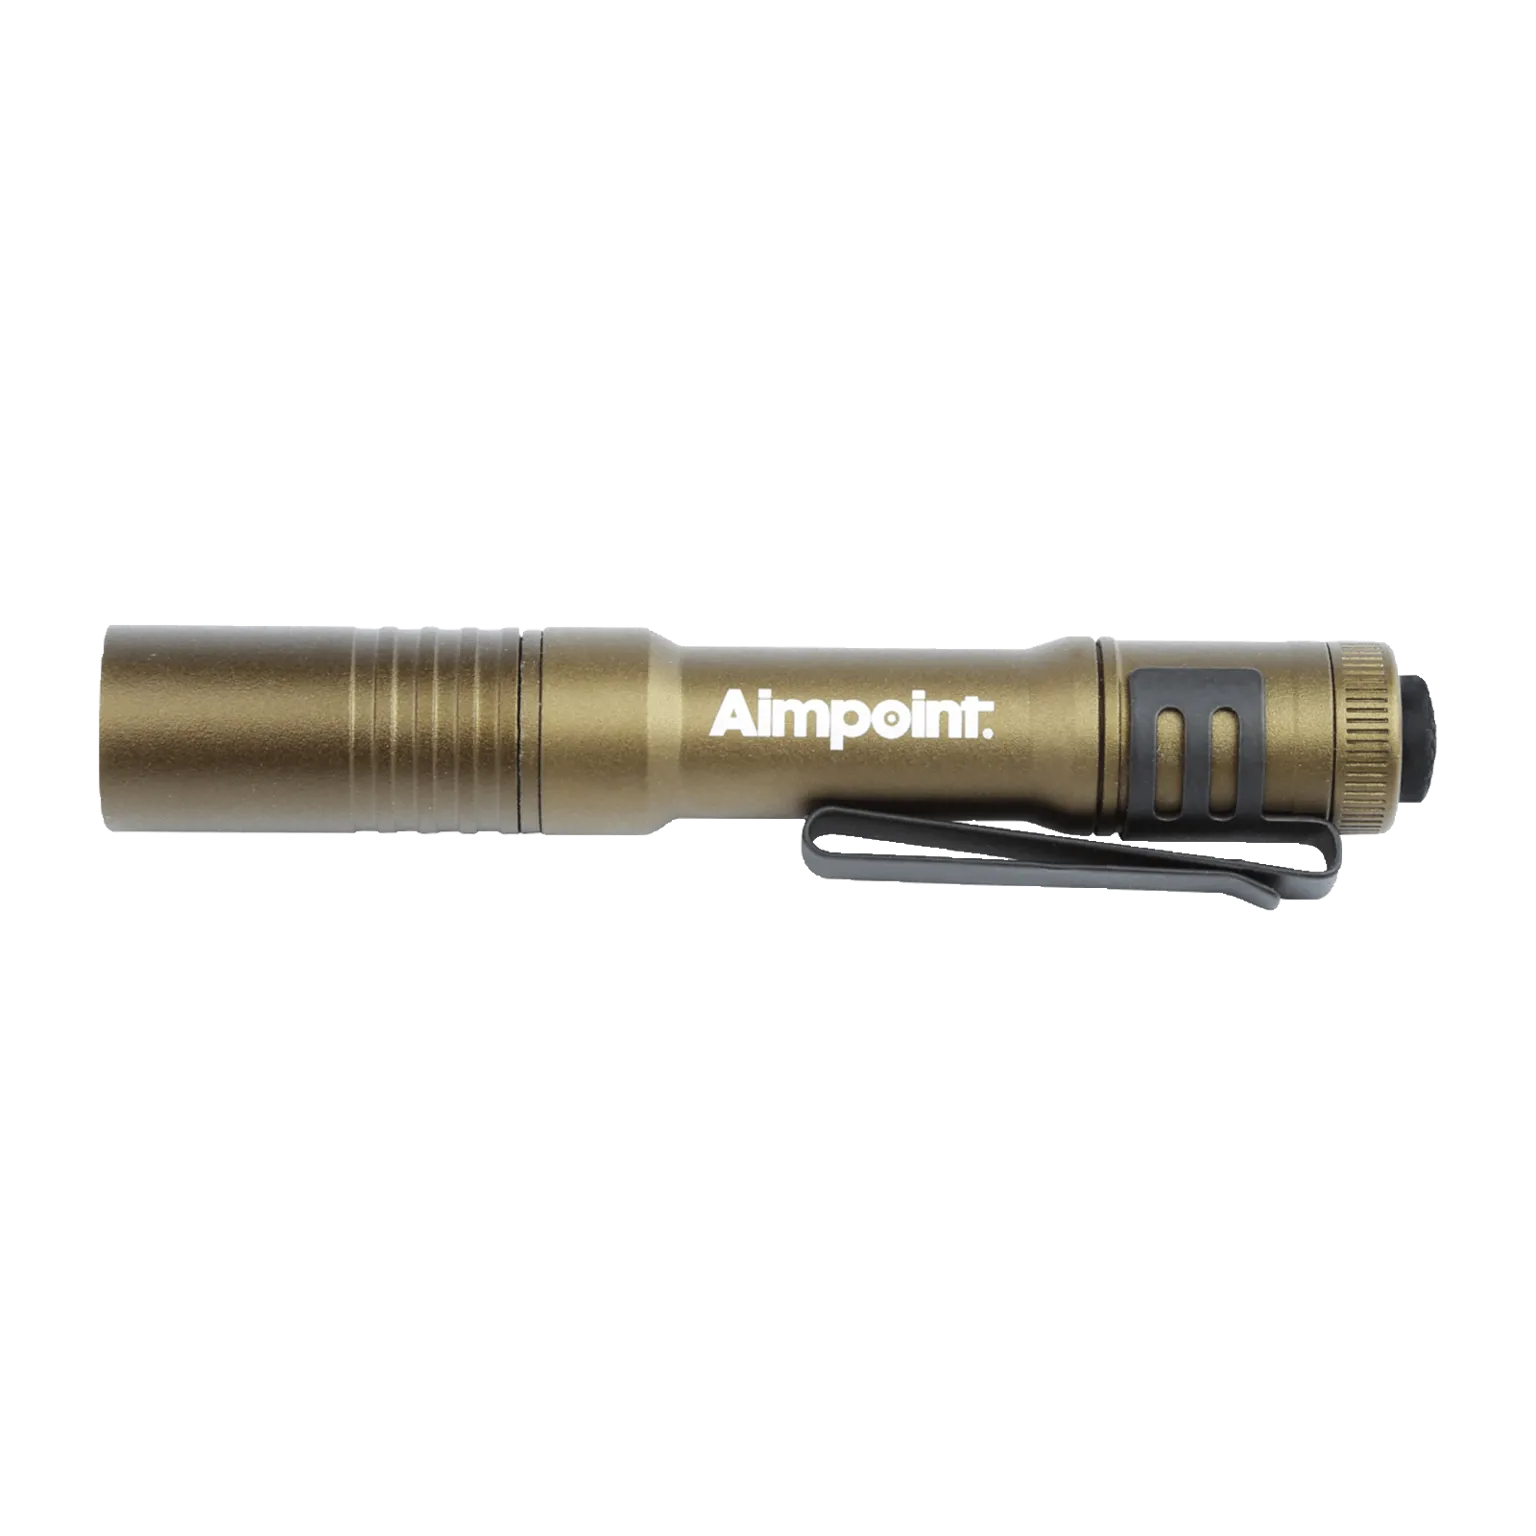 Streamlight® Flashlight - Brown/beige with Aimpoint® logo  - 2